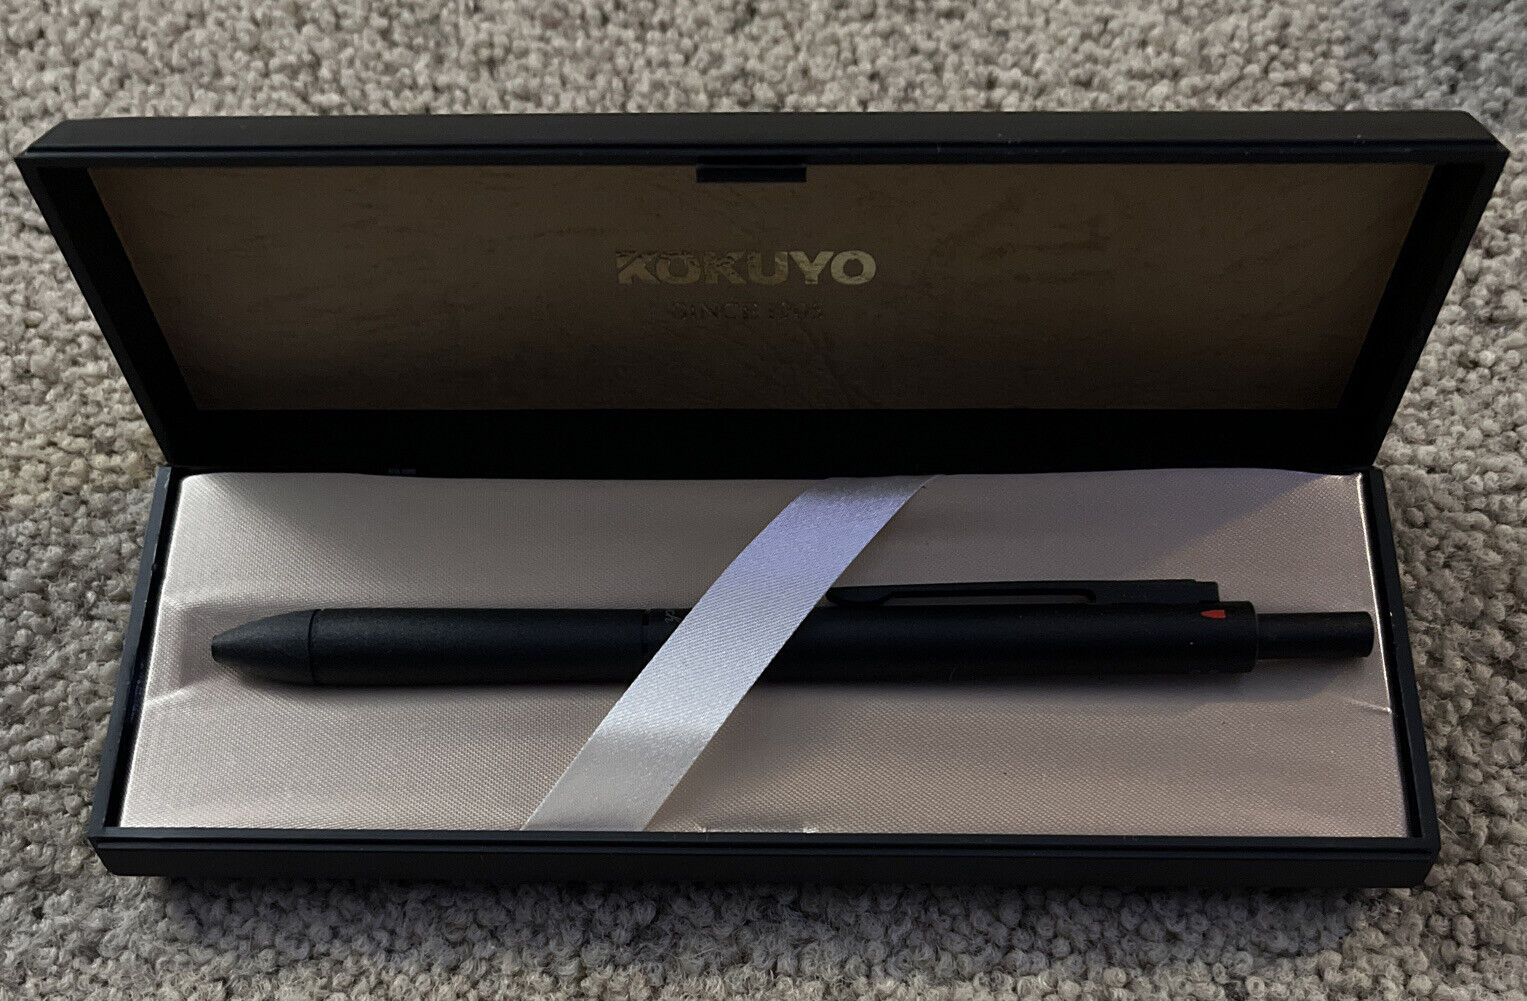 Vintage Kokuyo Withby Clicktouch Smart Pen - Ballpoint/Stylus/Mechanical Pencil